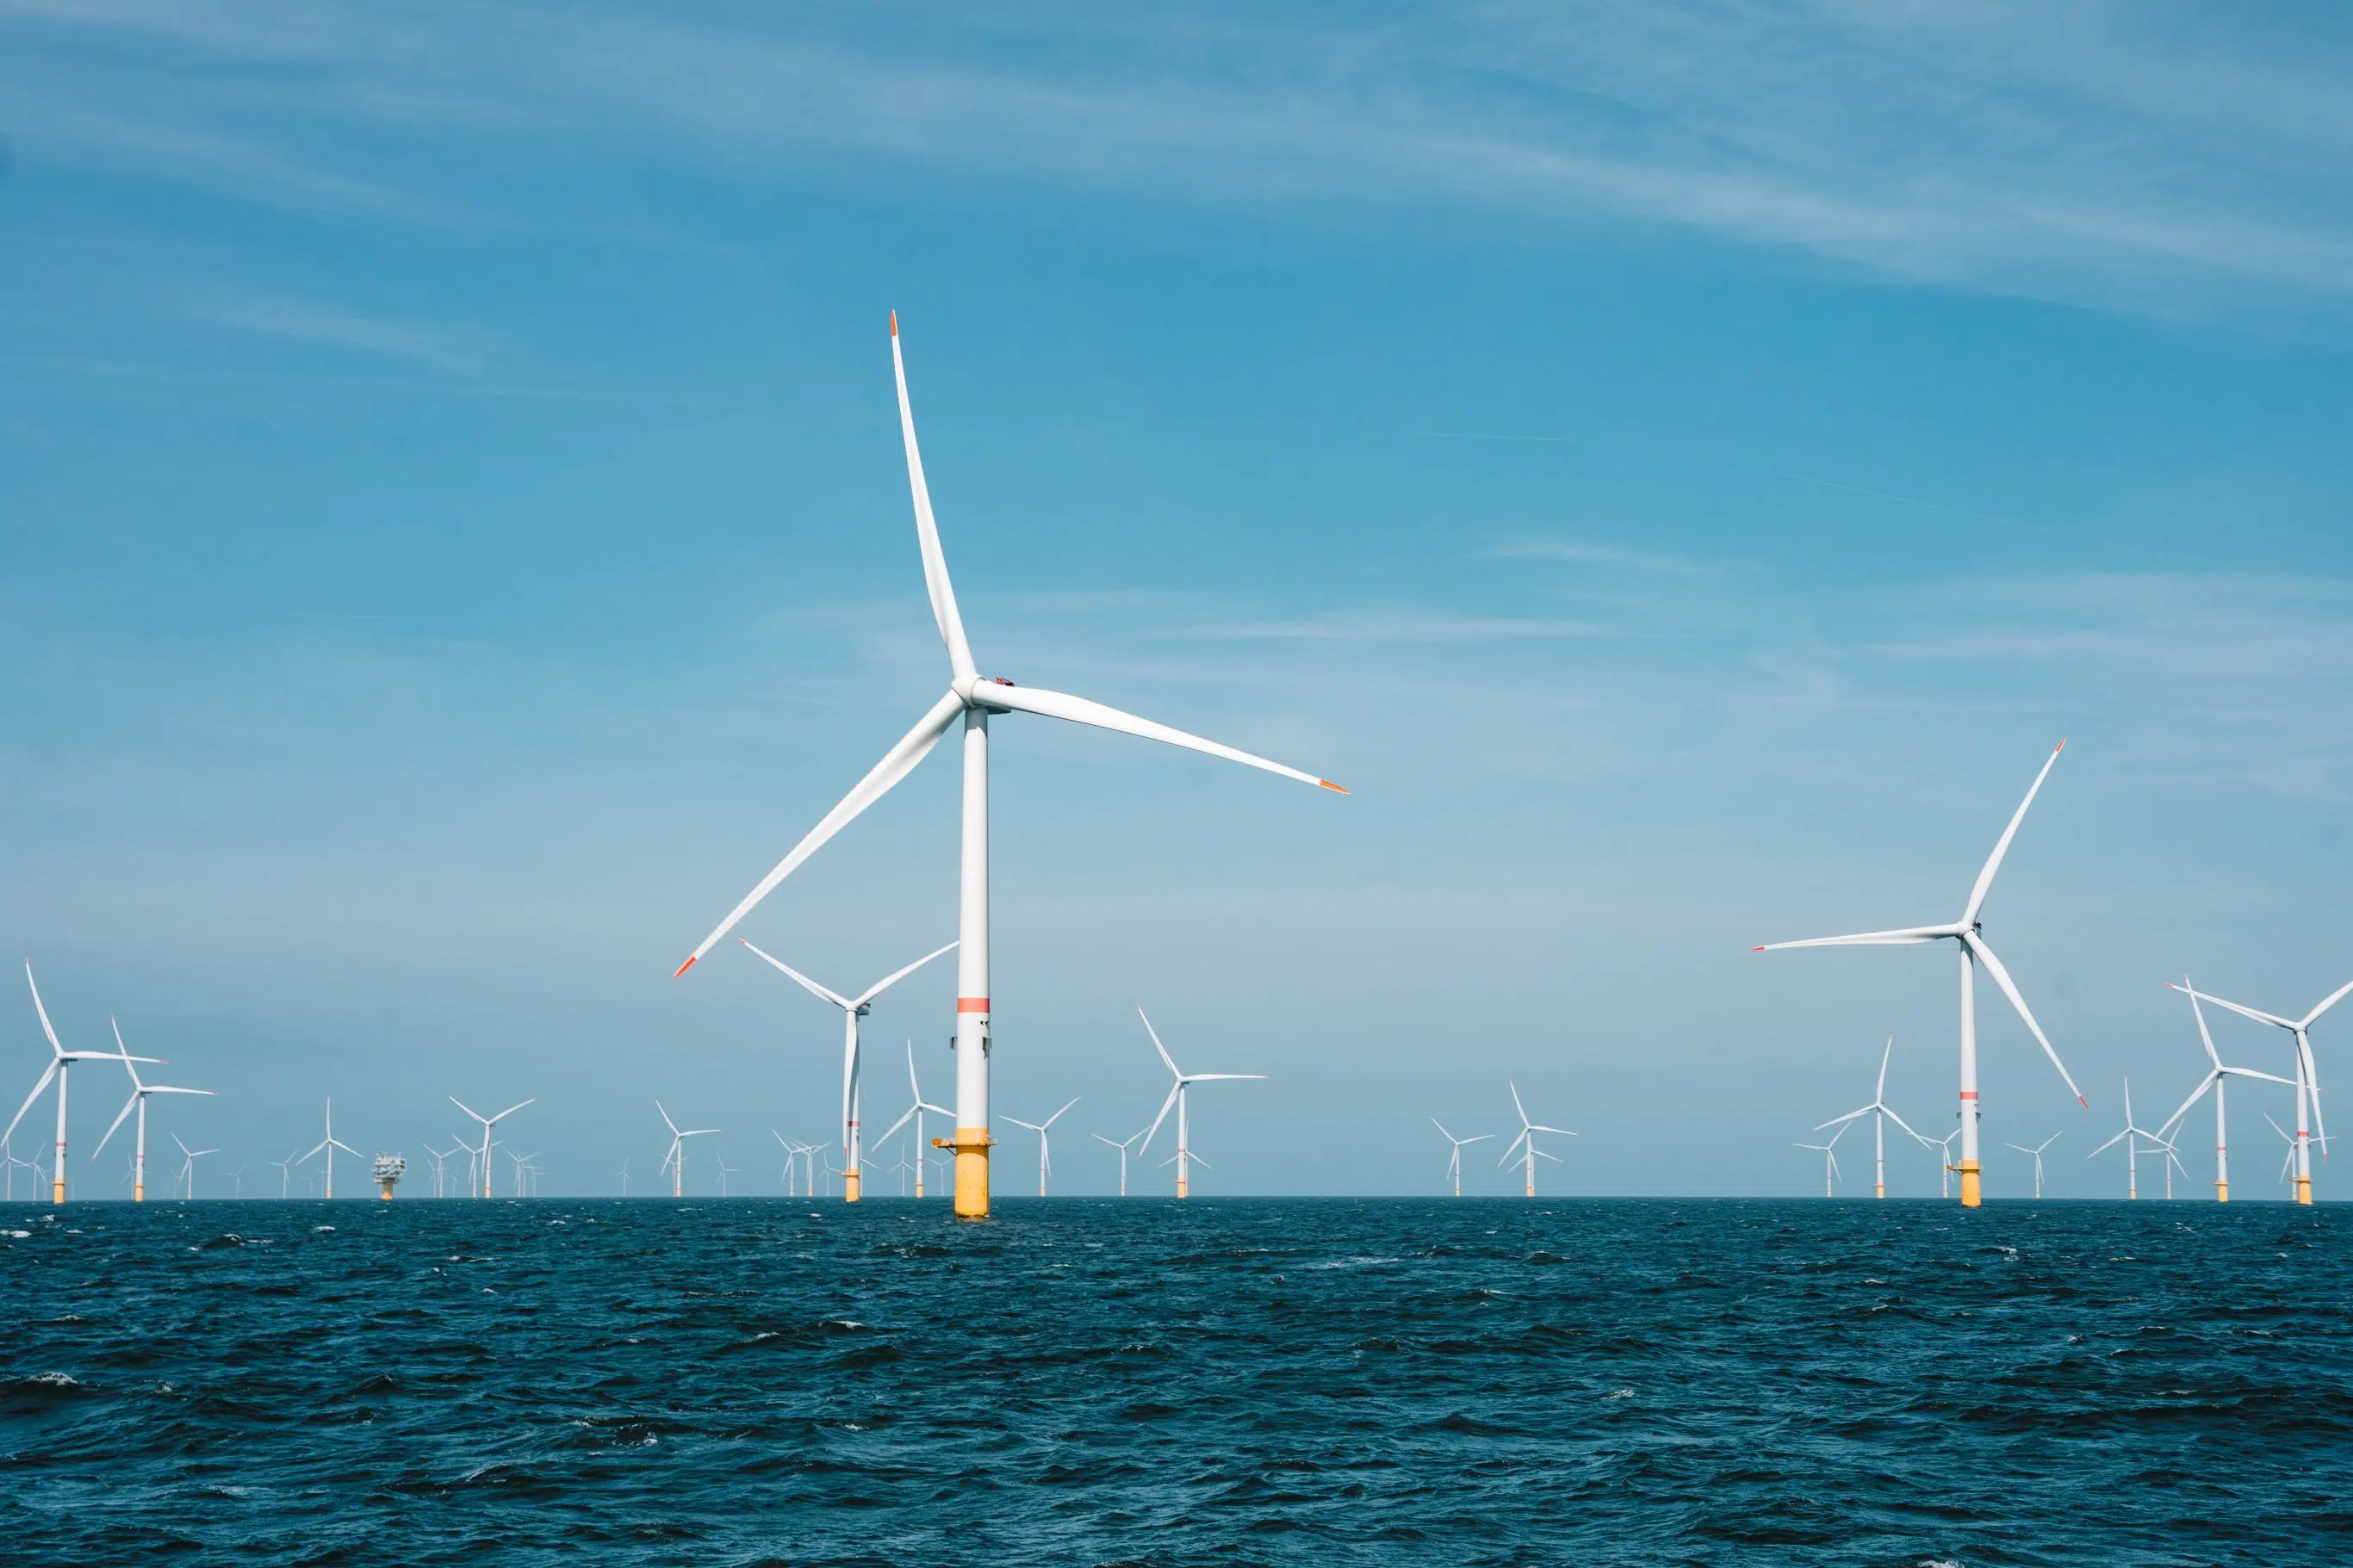 Canada's first offshore wind farm is coming to Nova Scotia